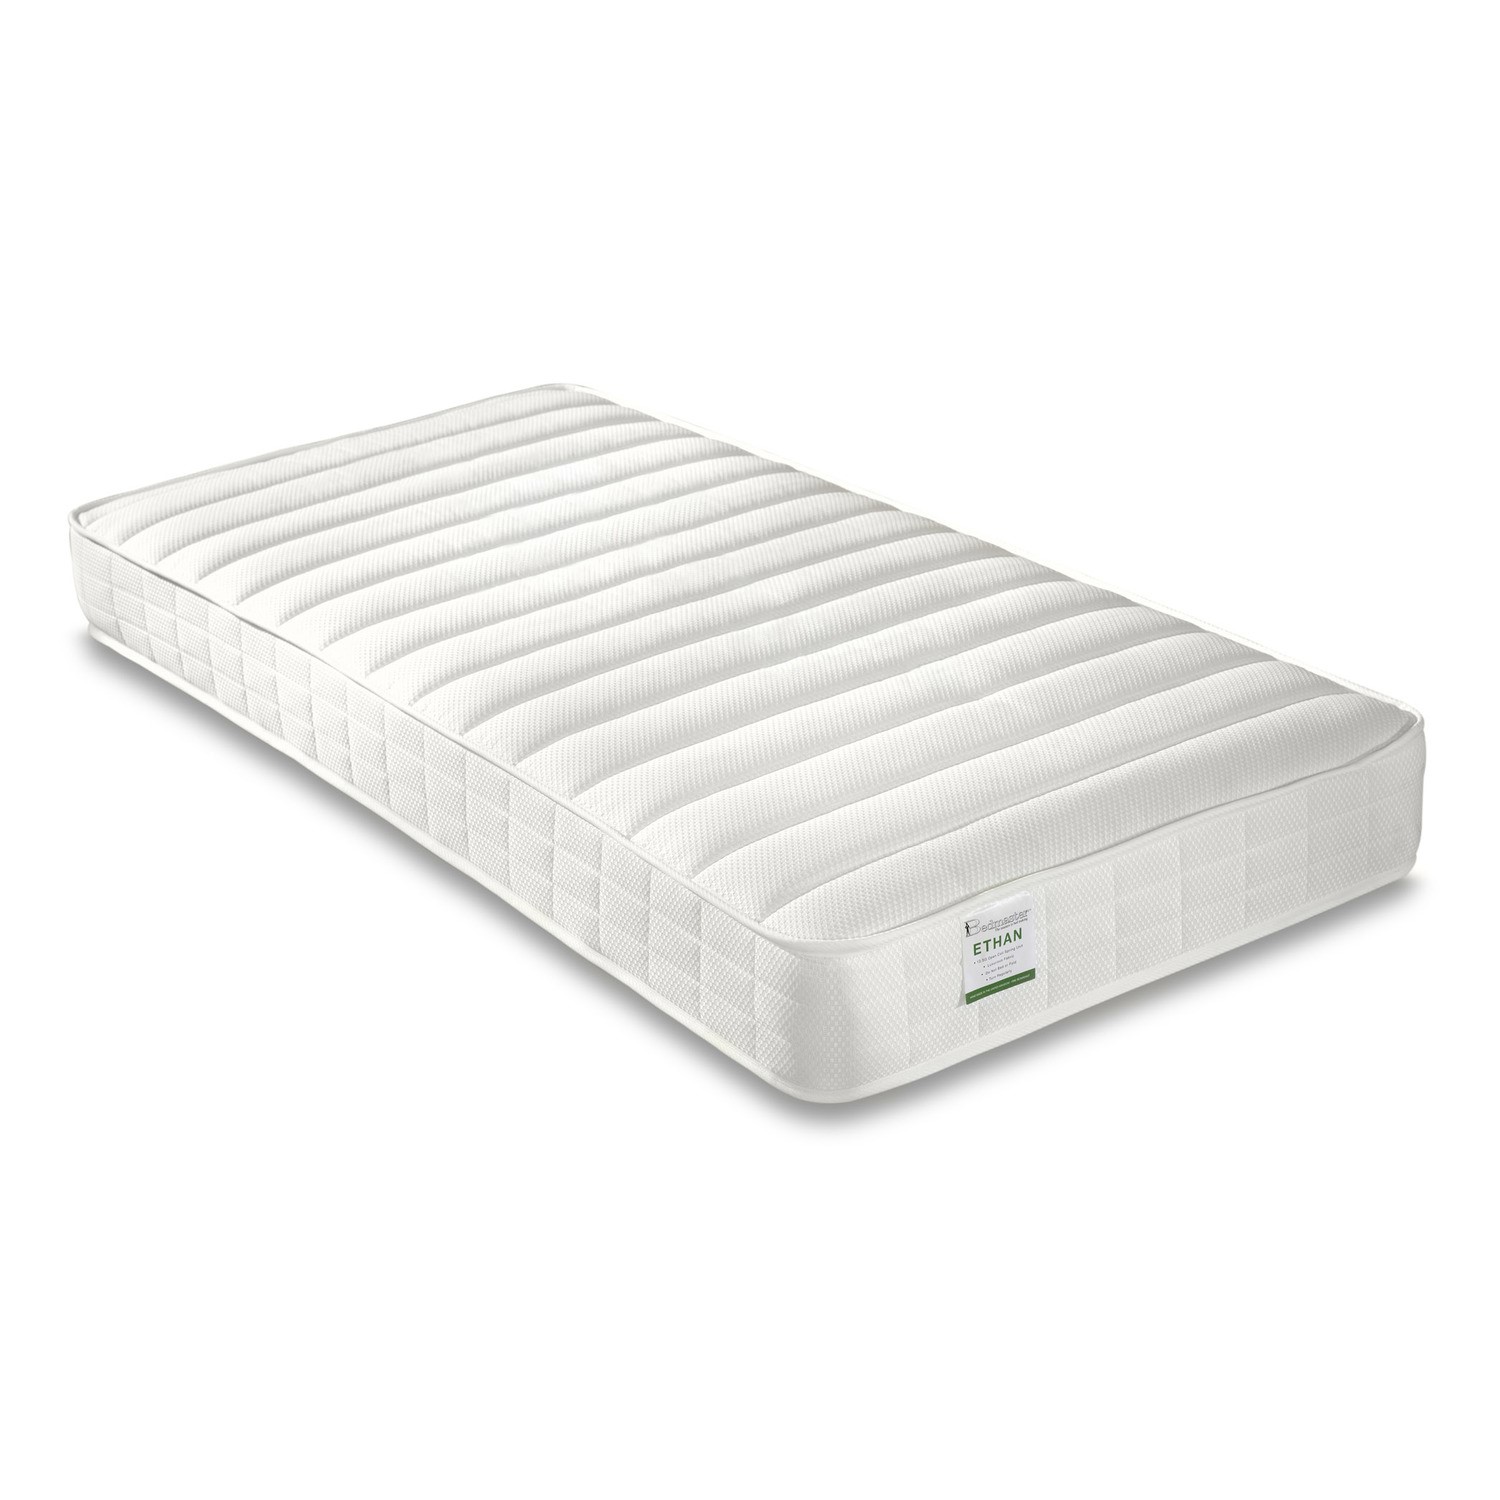 Read more about Small single open coil spring quilted mattress ethan